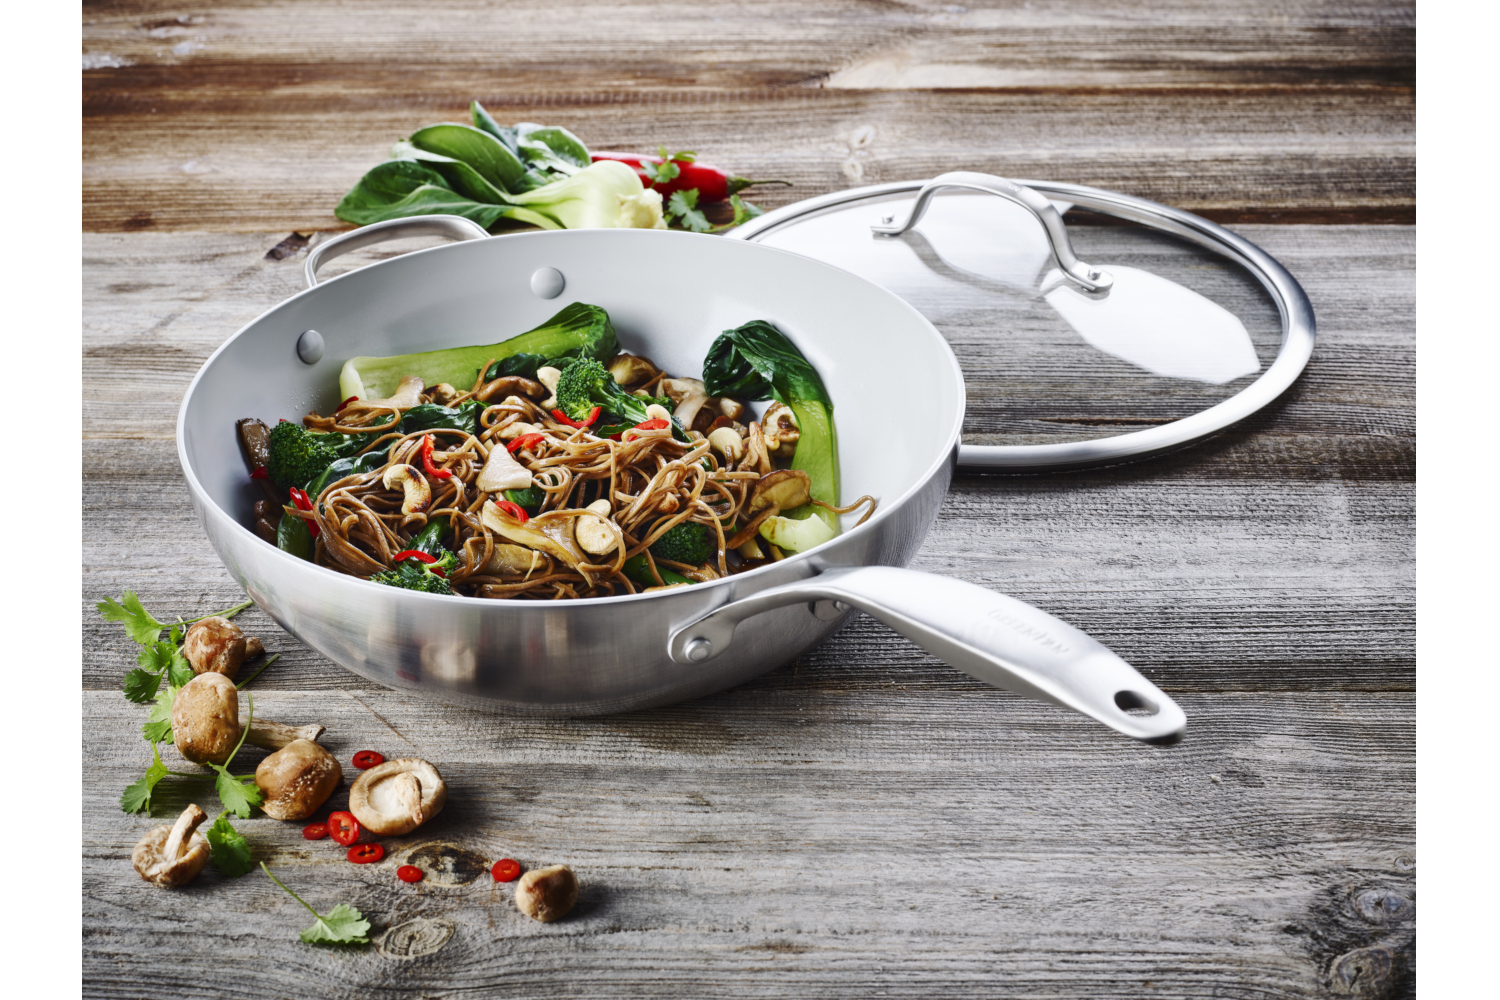 Bella Flame 12 Green Ceramic Coated Nonstick Wok W/ Glass Lid, Pan, Nanotechnology Products